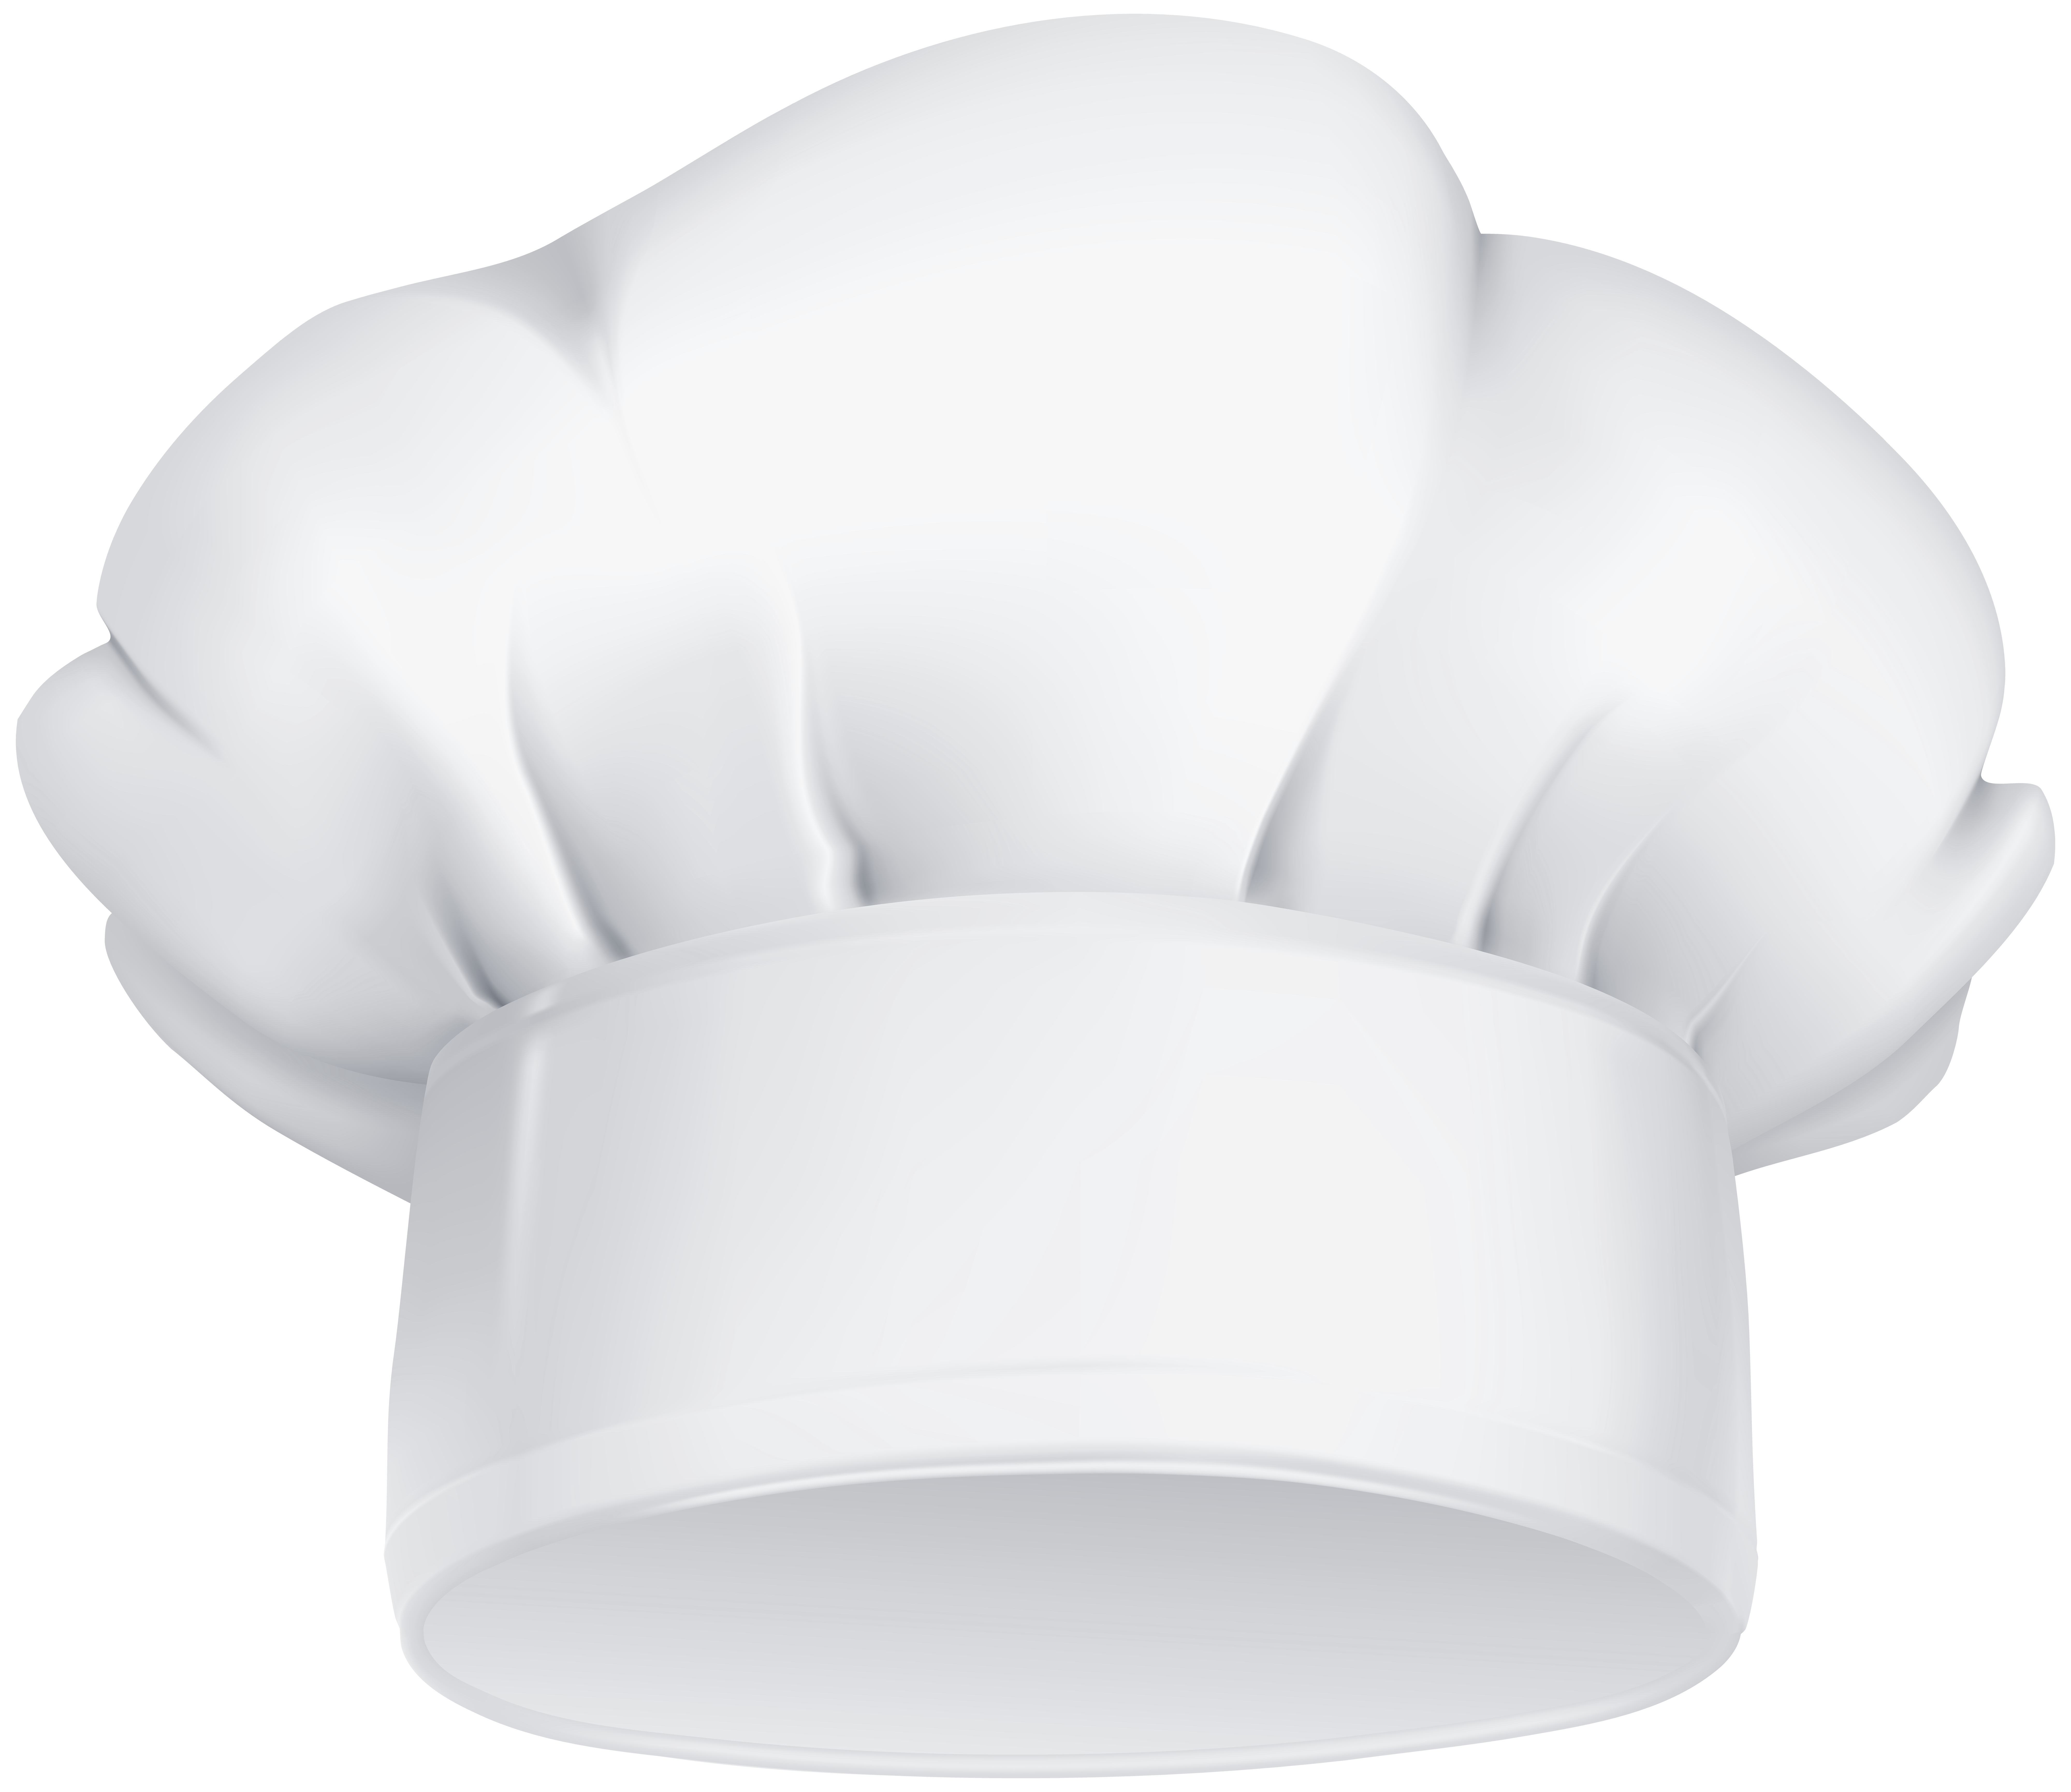 free clipart images chef hat - photo #17